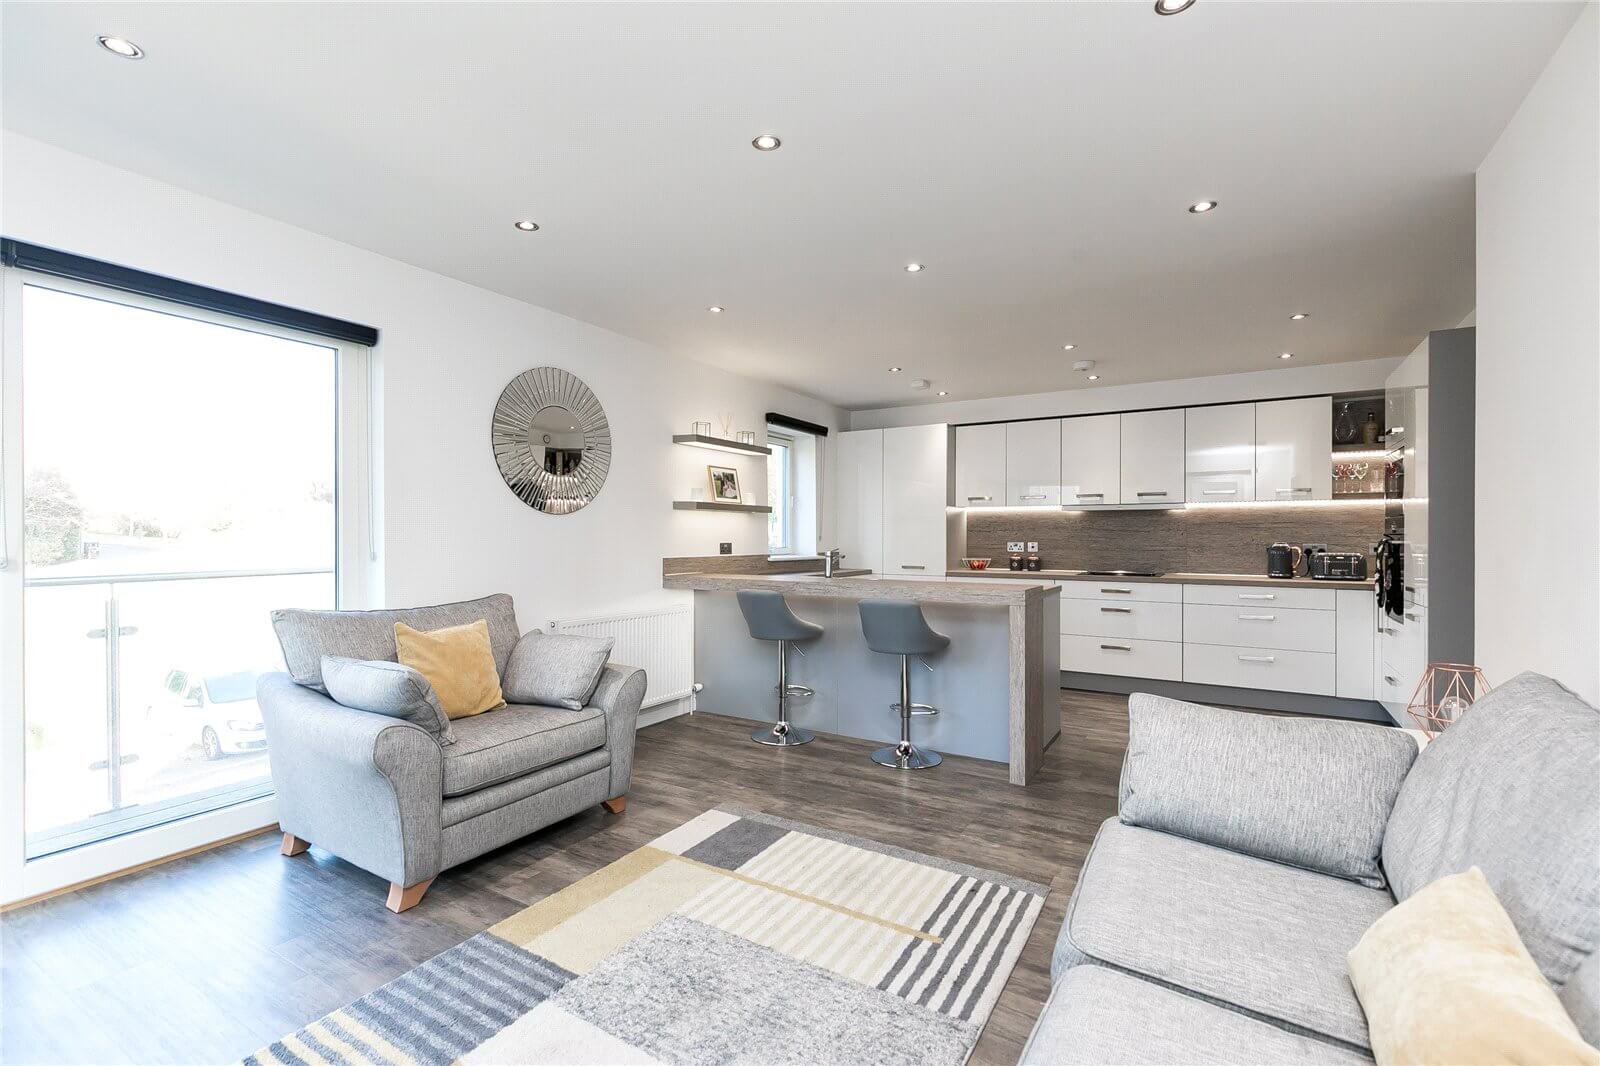 Contemporary homes near Aberdeen City Centre for under £250,000